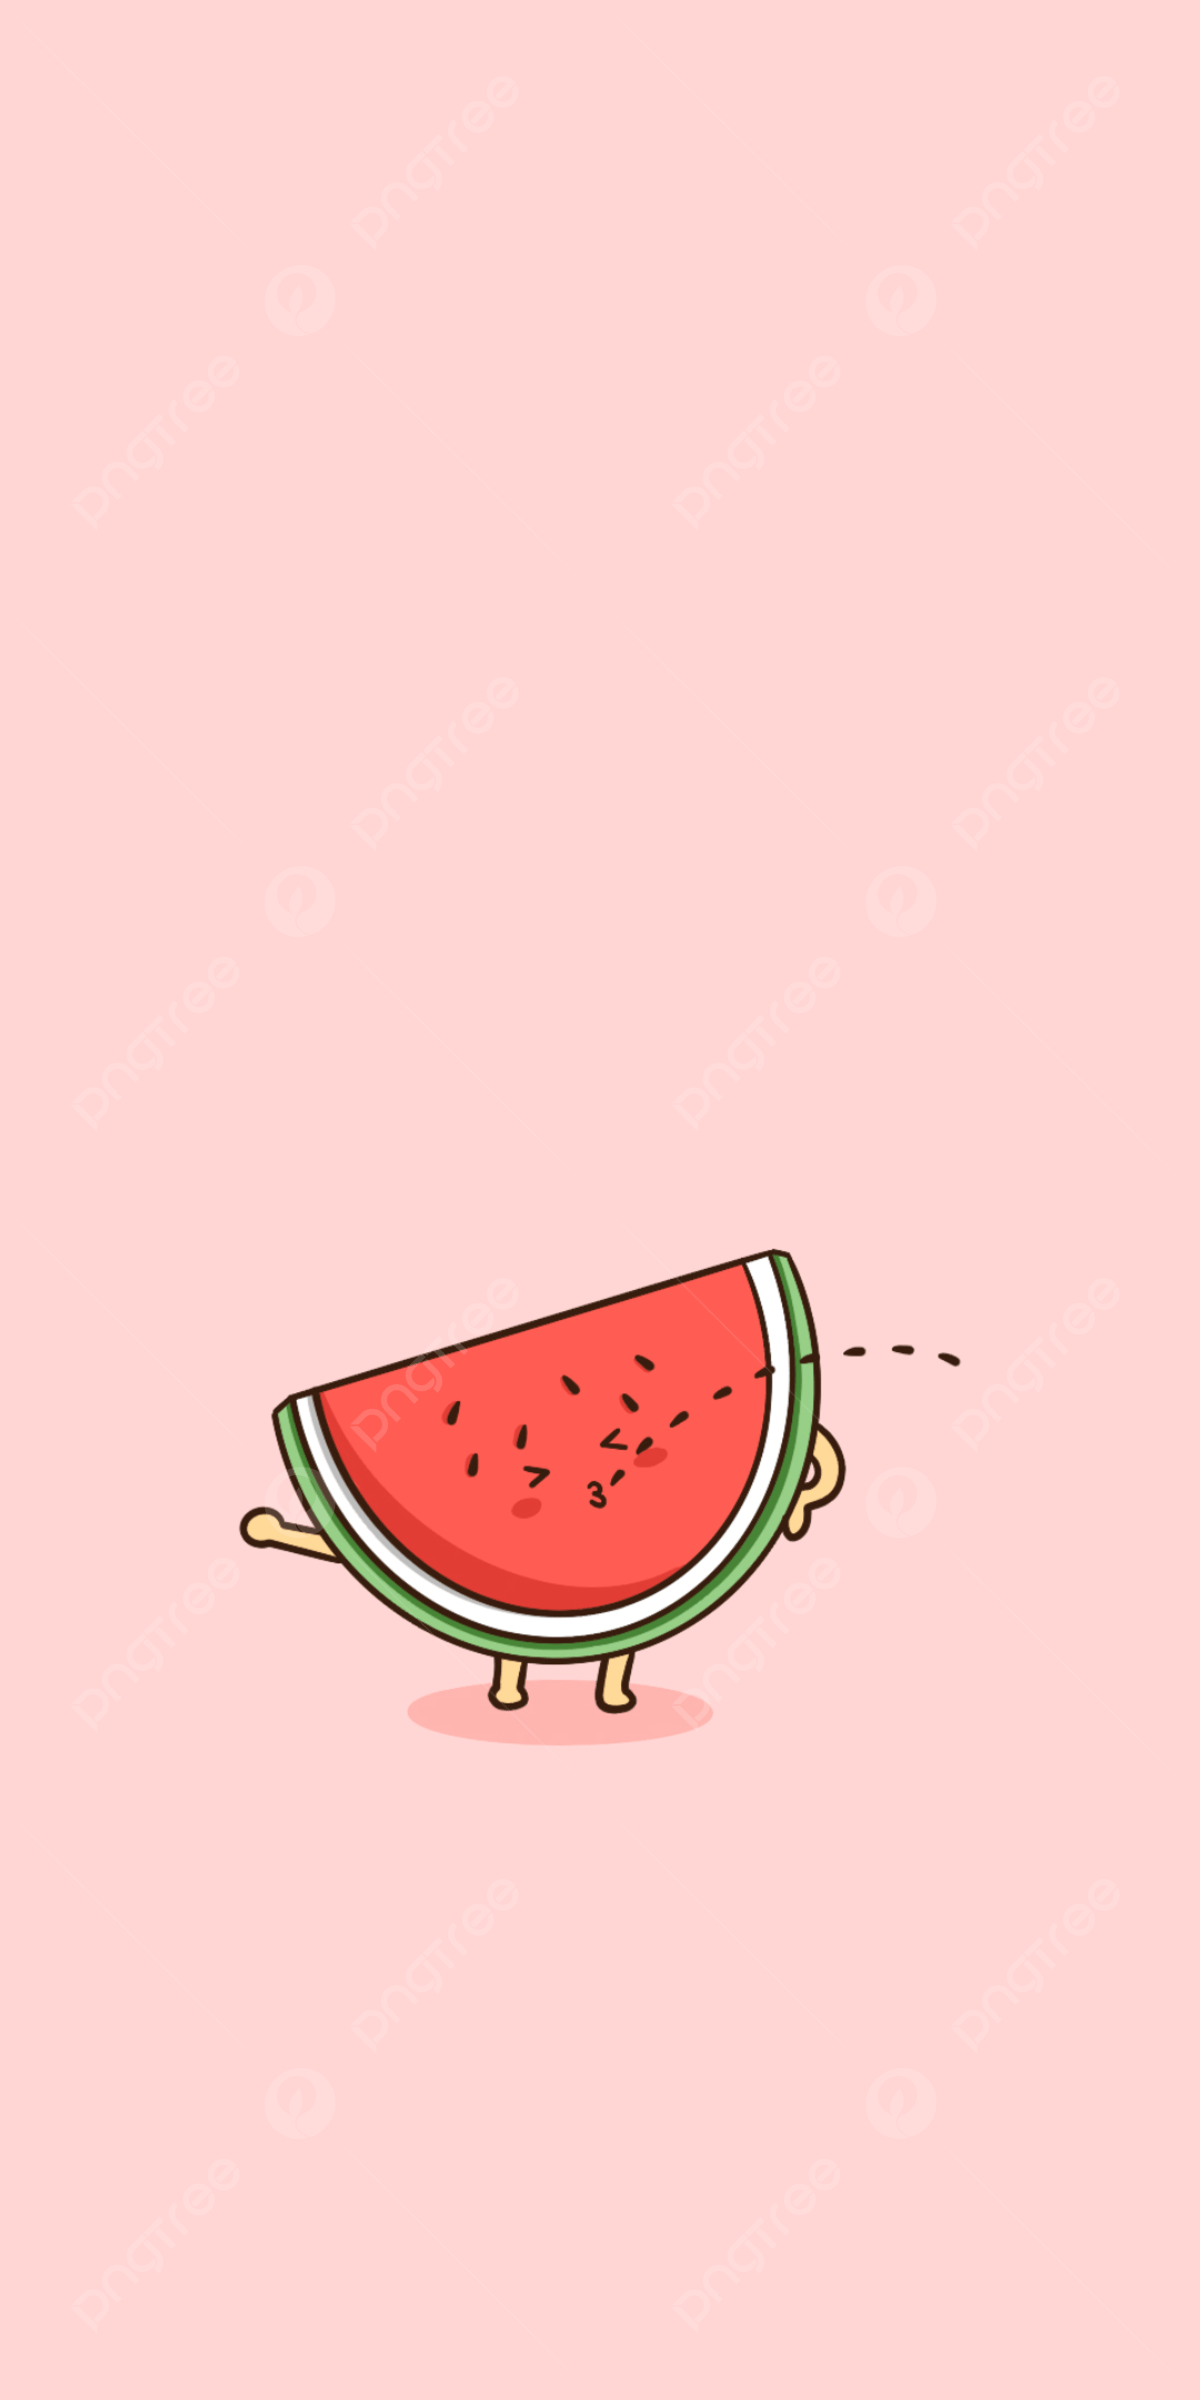 Cute Watermelon Background Image, HD Picture and Wallpaper For Free Download